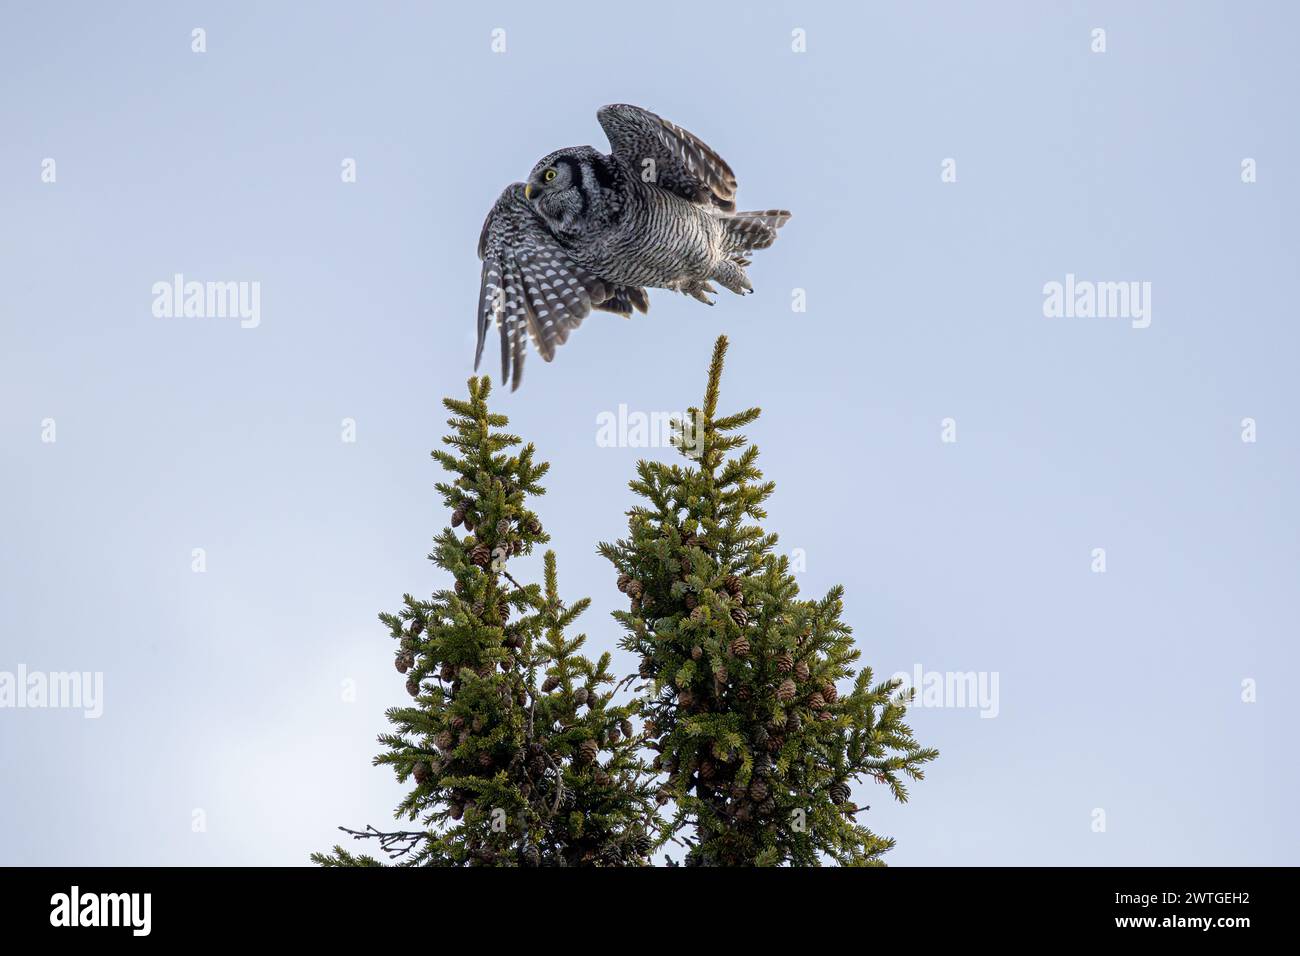 Northern Hawk Owl  (Surnia ulula) in the boreal forest of Saskatchewan, Canada. Northern Hawk Owls are uncommon and not well-studied. Stock Photo